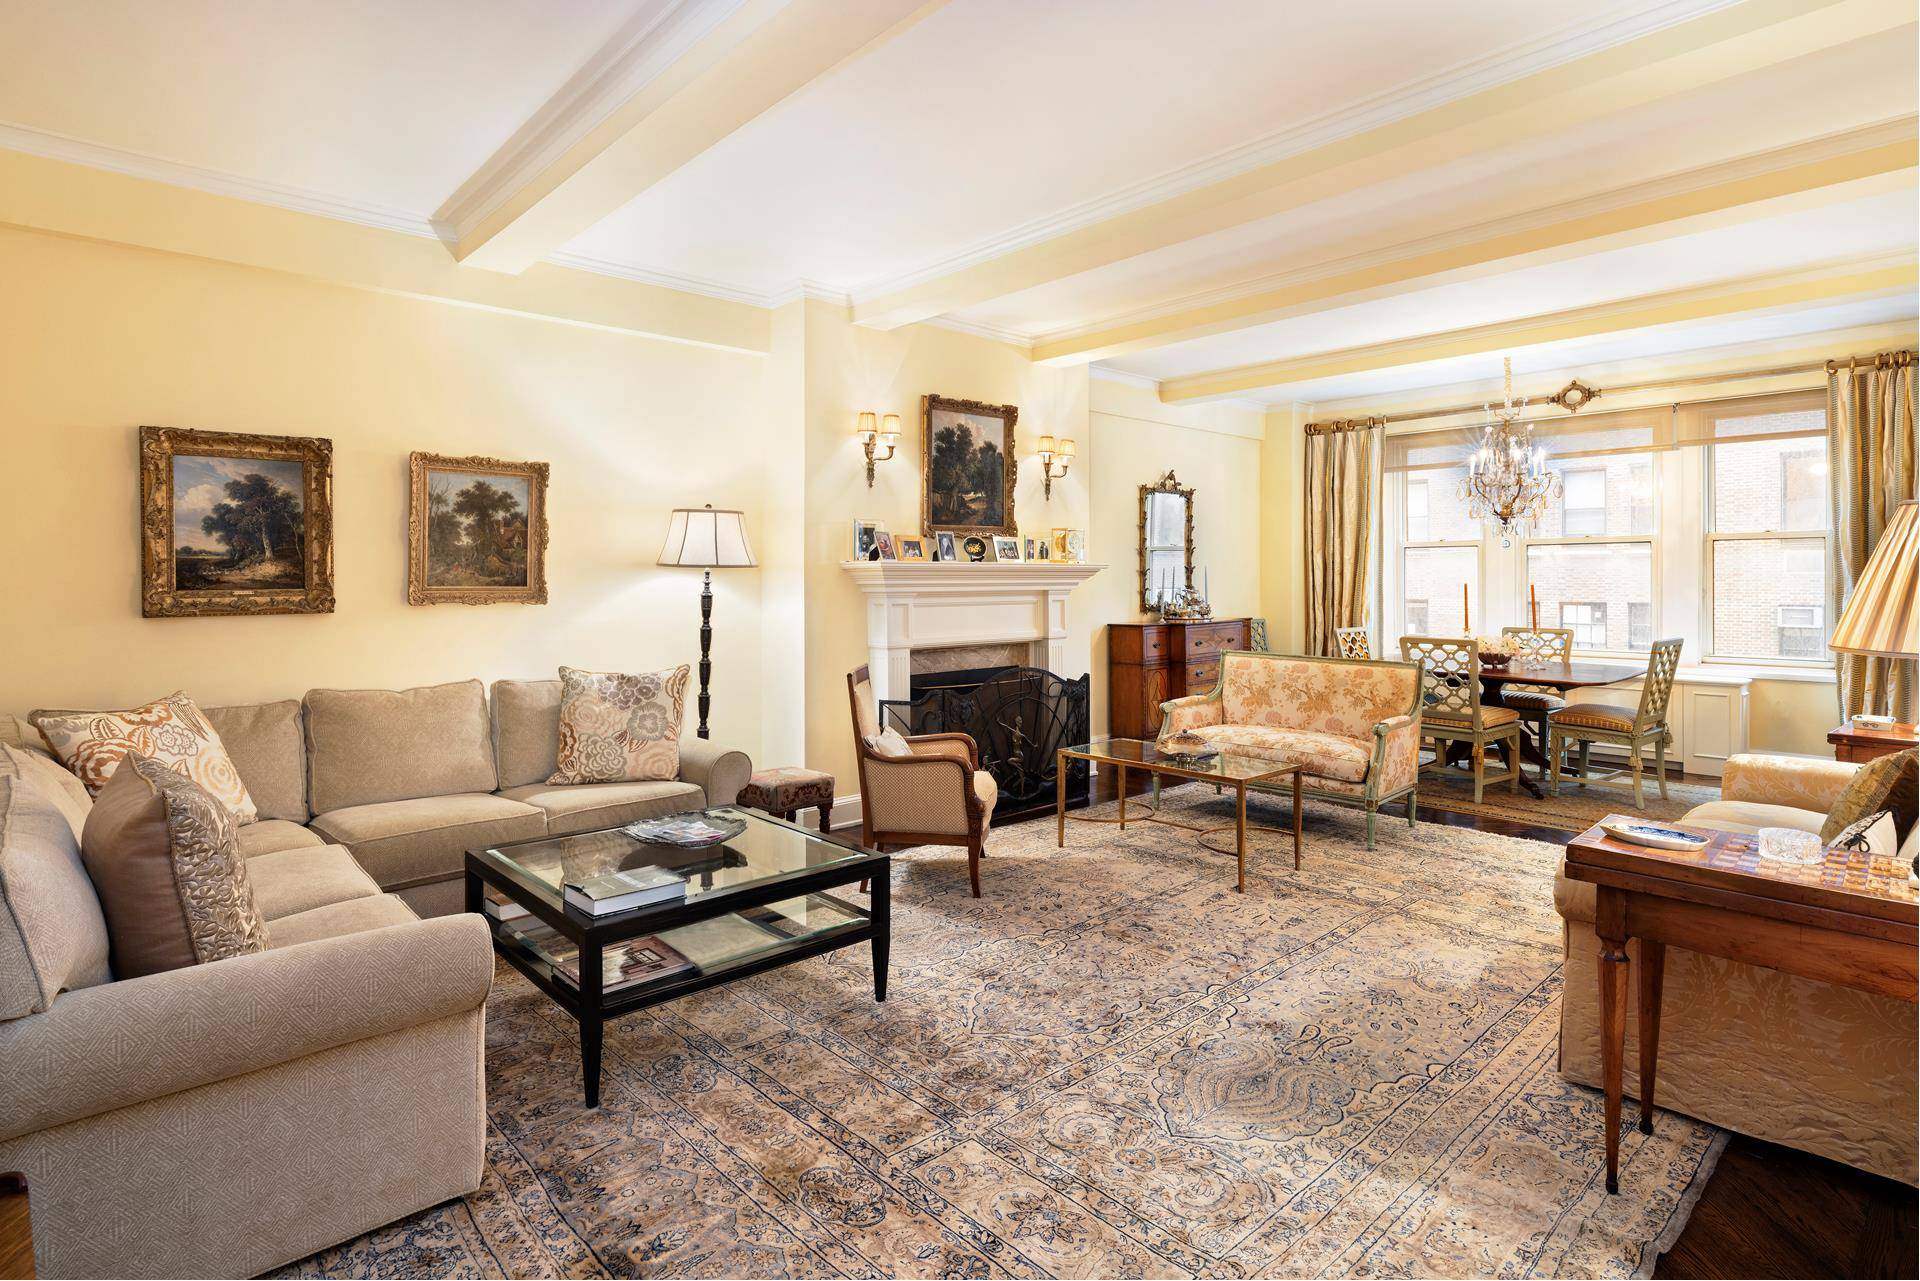 Apartment 7C is located in a premier Park Avenue pre war cooperative on the Northwest corner of 90th and Park Avenue.